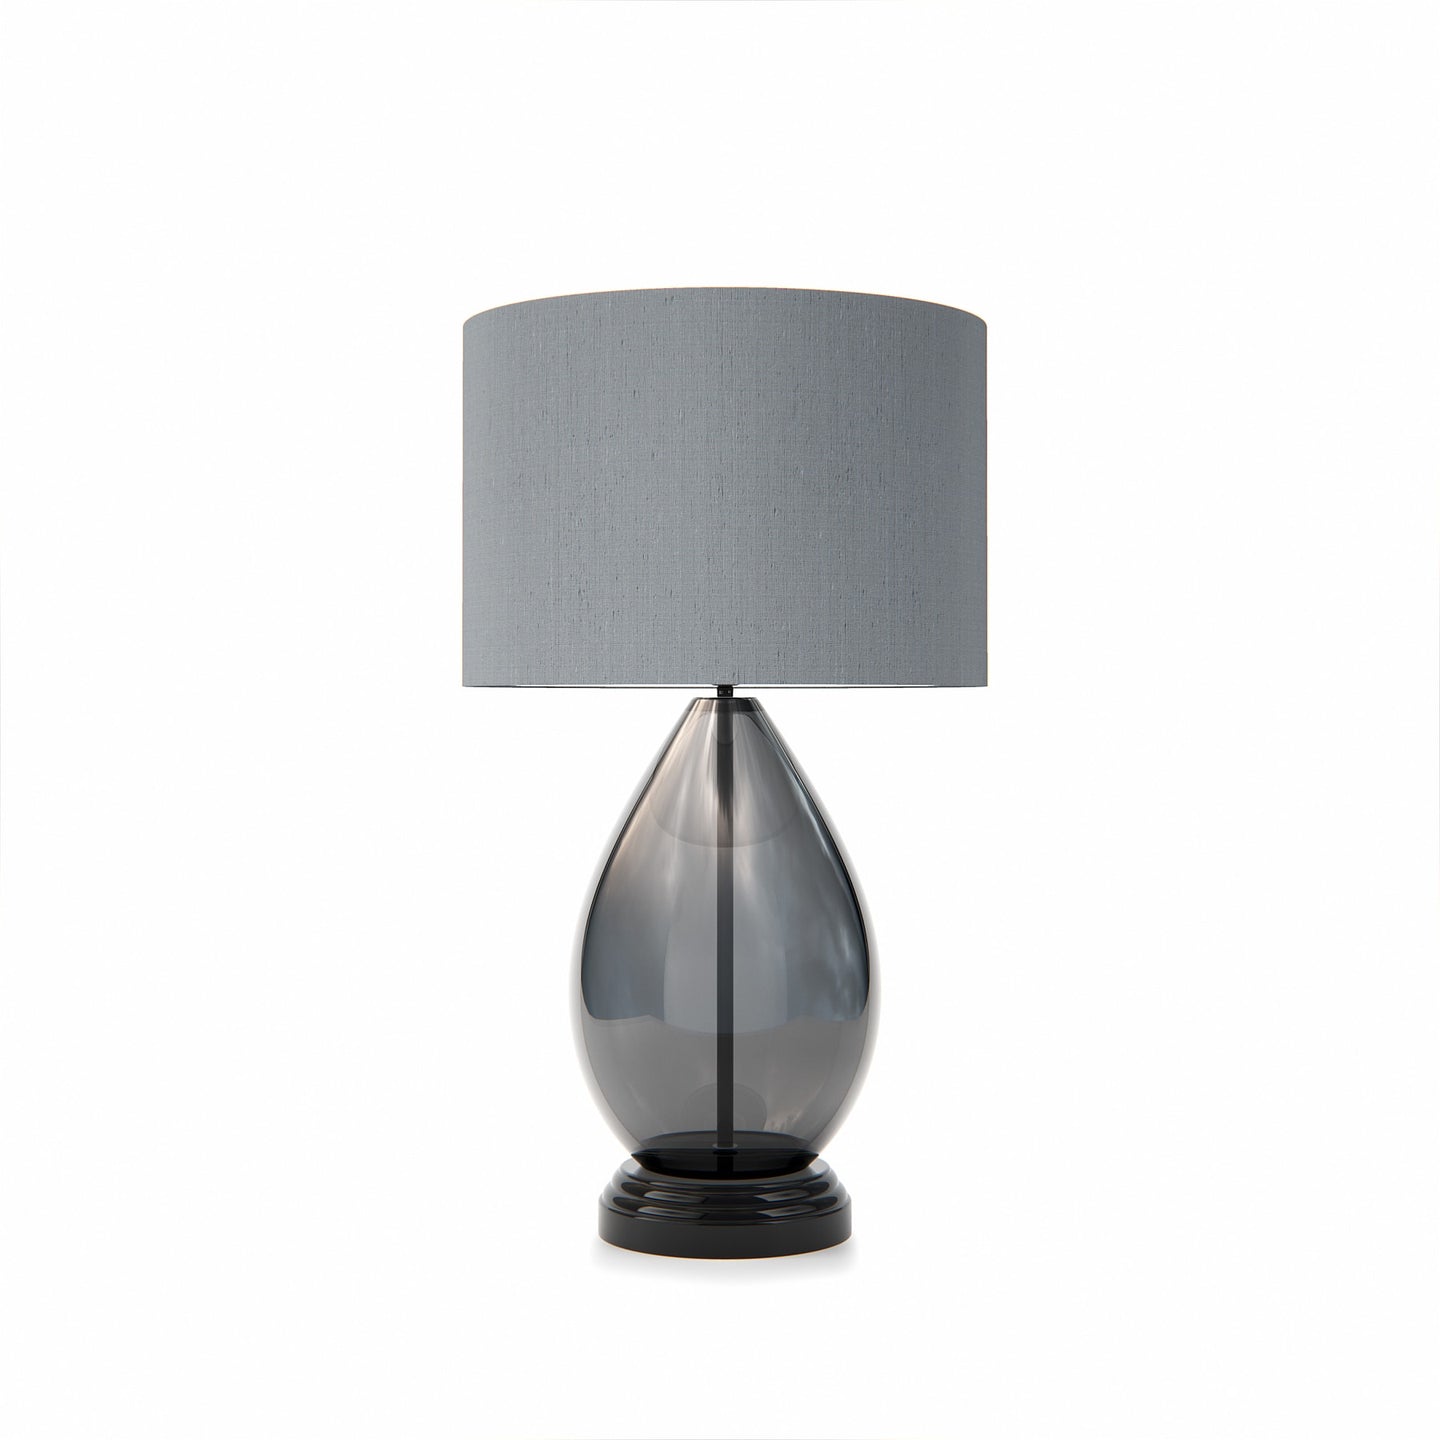 Blenheim Cordless Lamp made by Alexander Joseph for AUTHOR's luxury collection of home accessories